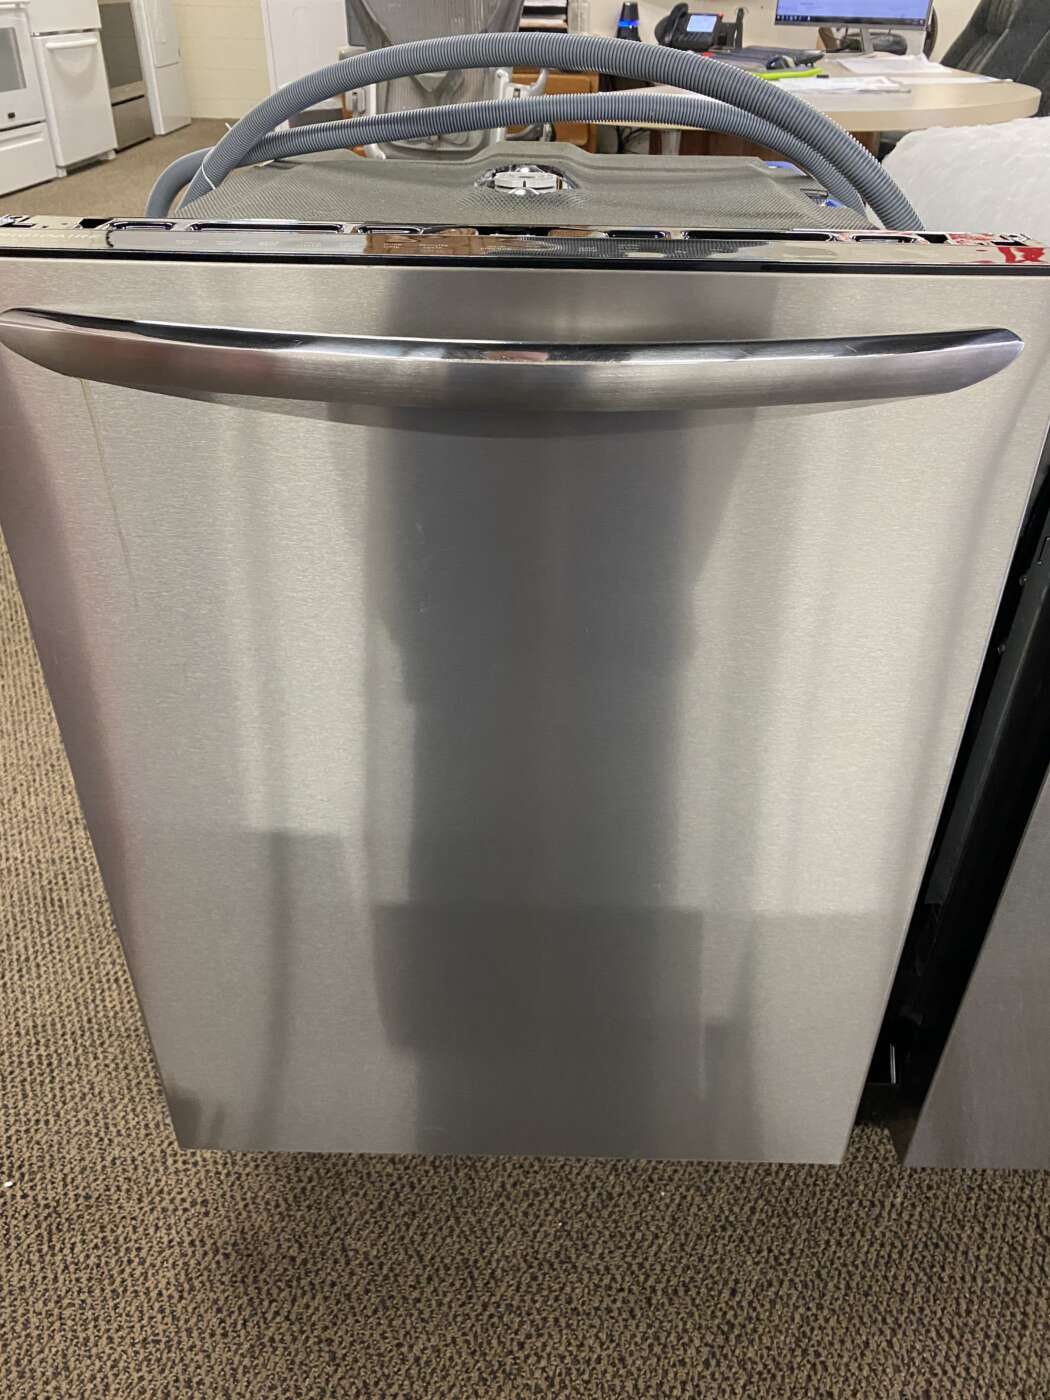 Reconditioned Frigidaire Stainless-Tub Built-In Dishwasher – Stainless